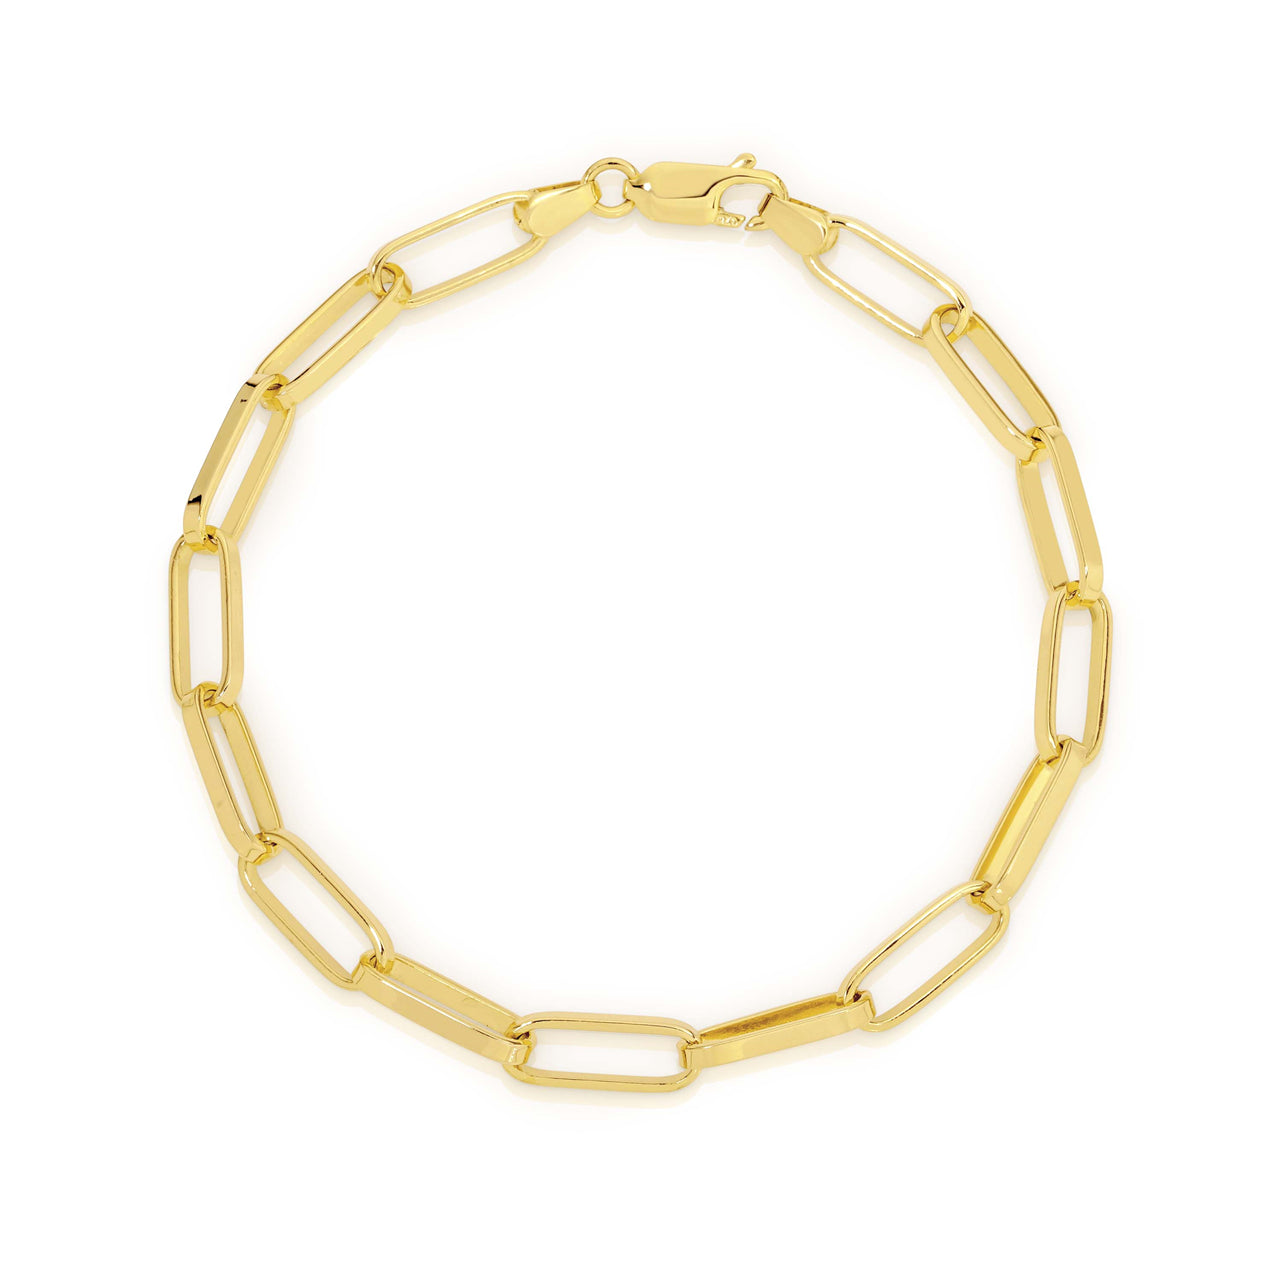 PaperClip Link Bracelet in Yellow Gold.